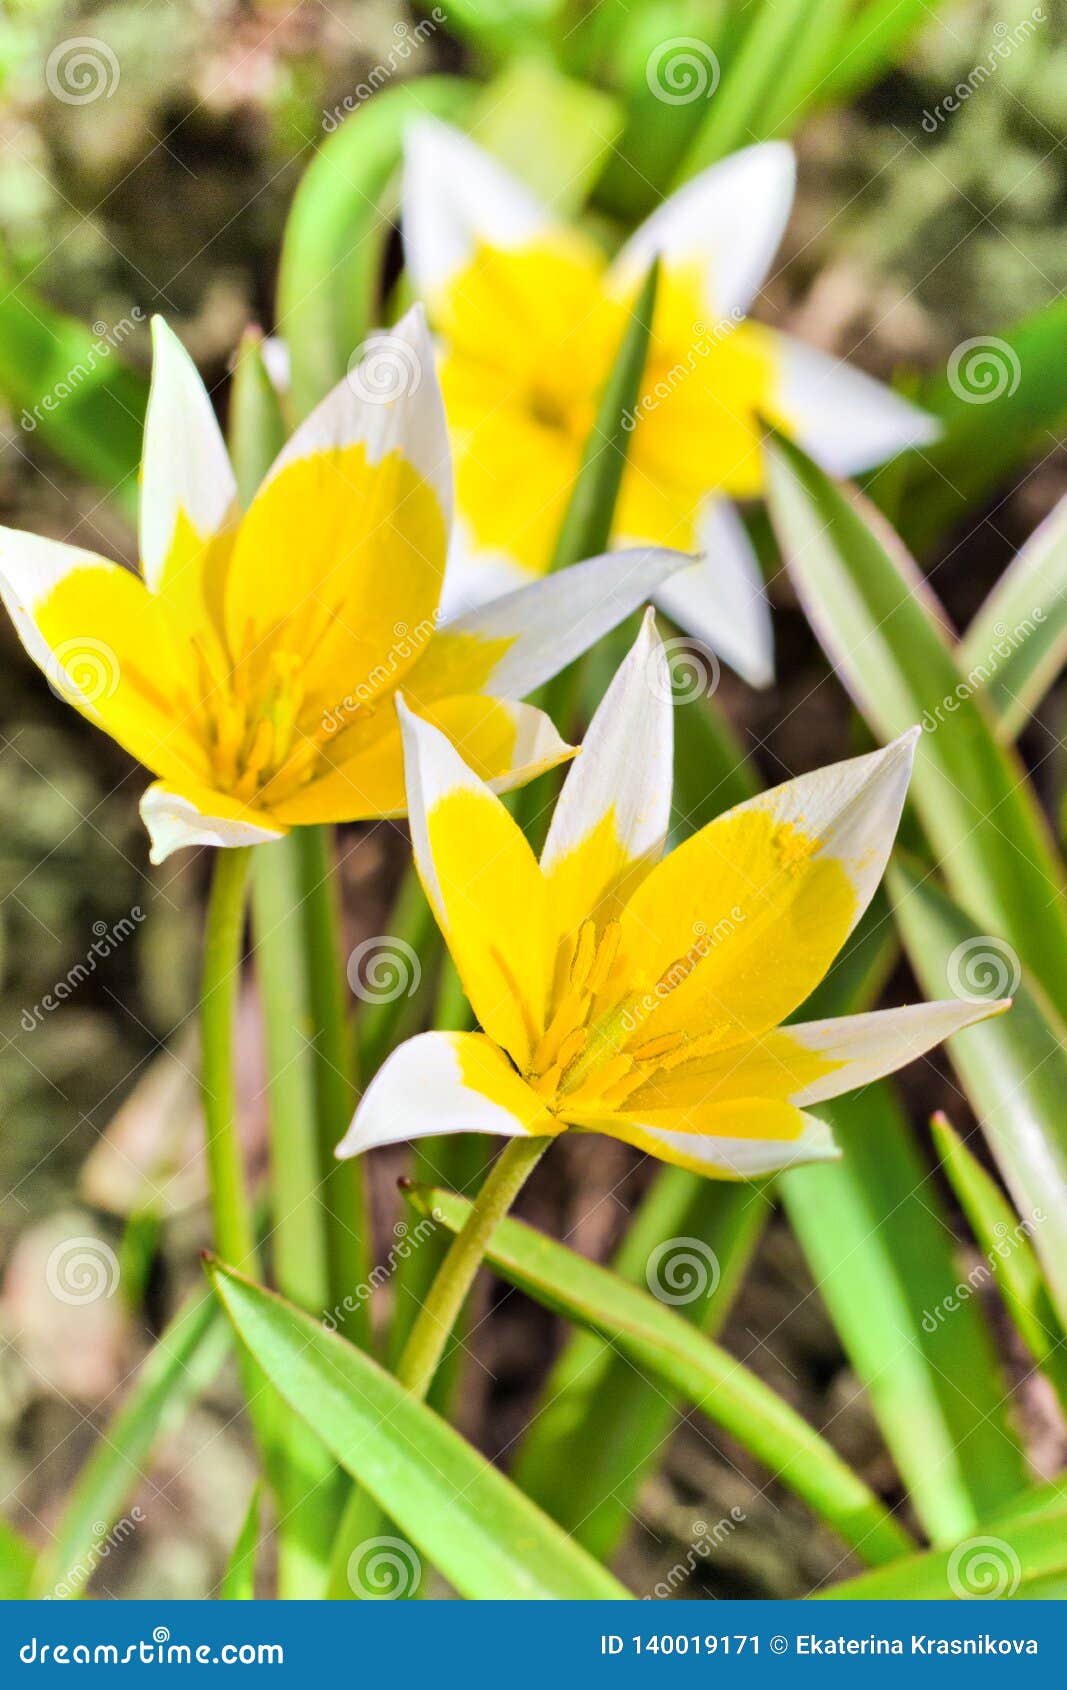 Yellow And White Tulip Blossoming In Garden On Natural Background Tulip Tarda Late Tulip Stock Image Image Of Macro Bulb 140019171